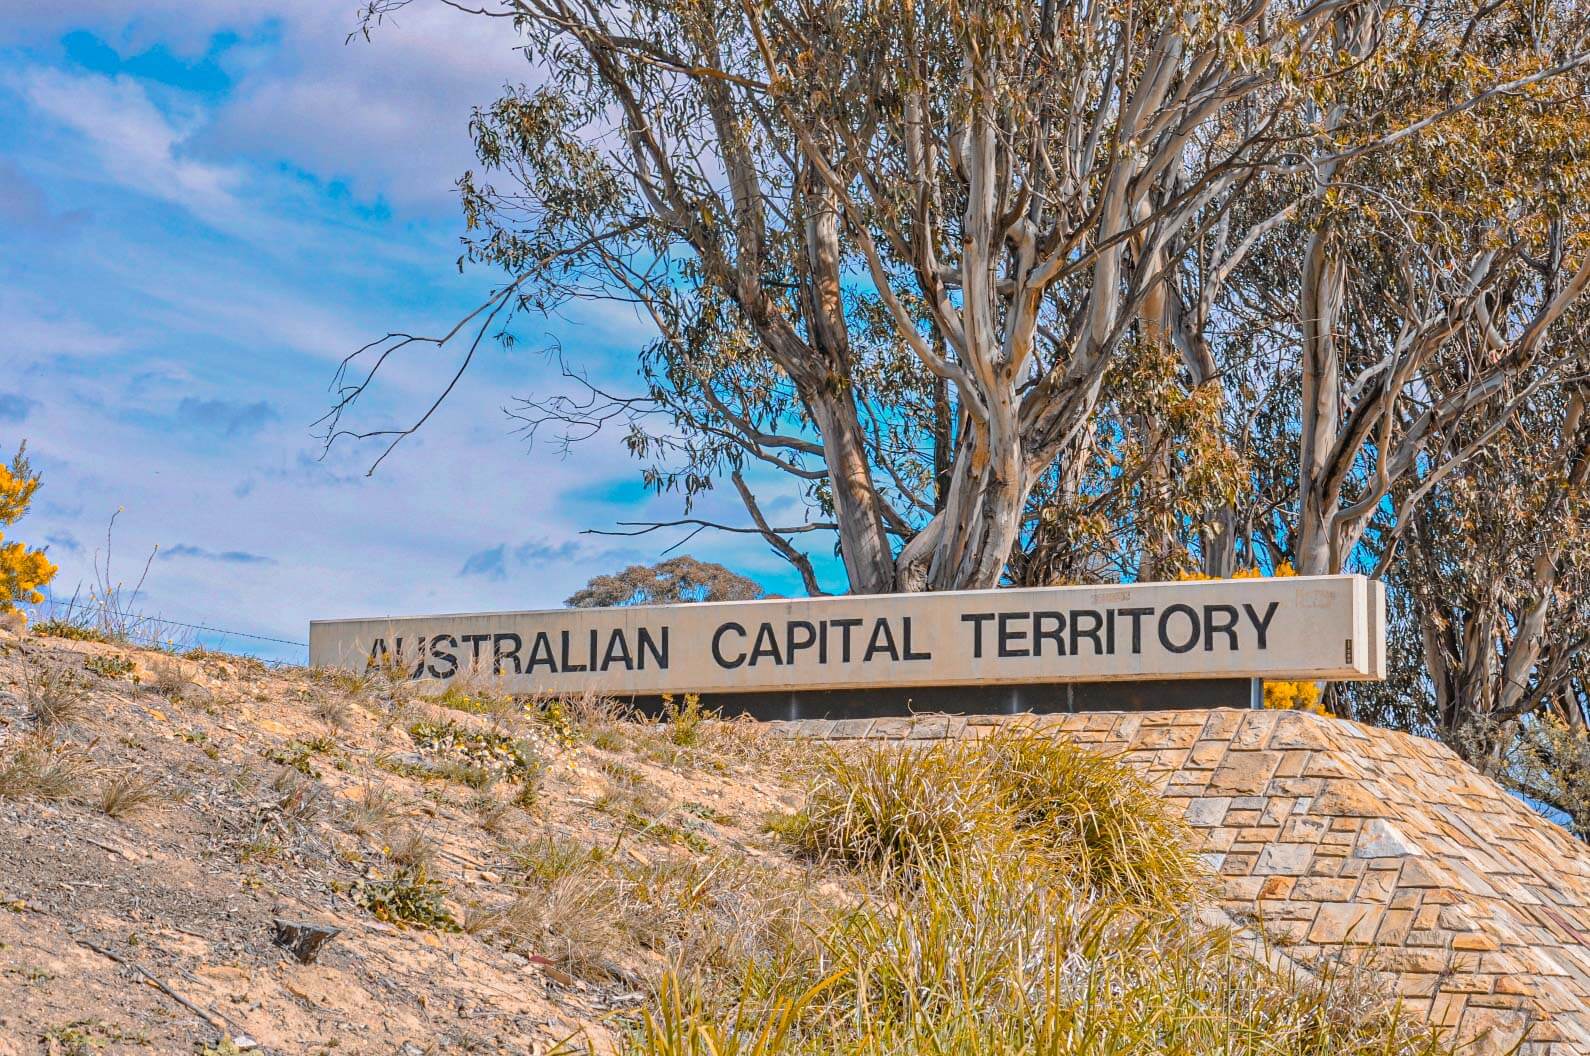 The best things to do in Canberra, Australia